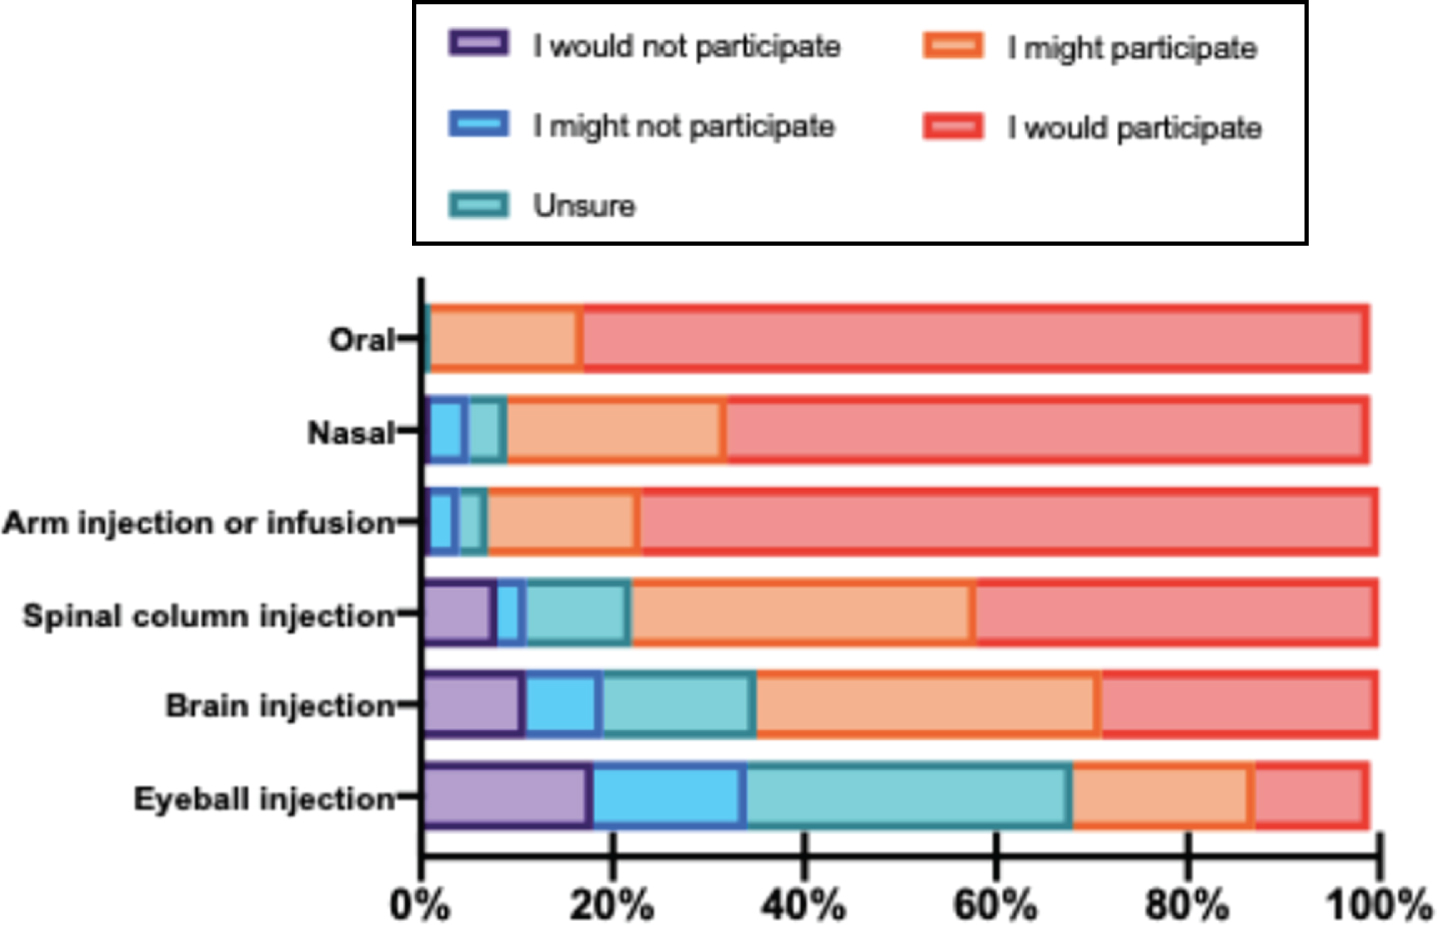 Willingness to participate in clinical trial depends upon the invasiveness of the trial procedure. Respondents were asked to rate their willingness to participate in a hypothetical clinical trial that on a 5-point Likert scale (1 = I would not participate to 5 = I would participate) based on the ROA of the therapy (oral, nasal, injection or infusion into the arm, or injection in the spinal column, brain, or eyeball). The graph represents the proportion of respondents who would or would not consider study participation for each possible ROA.